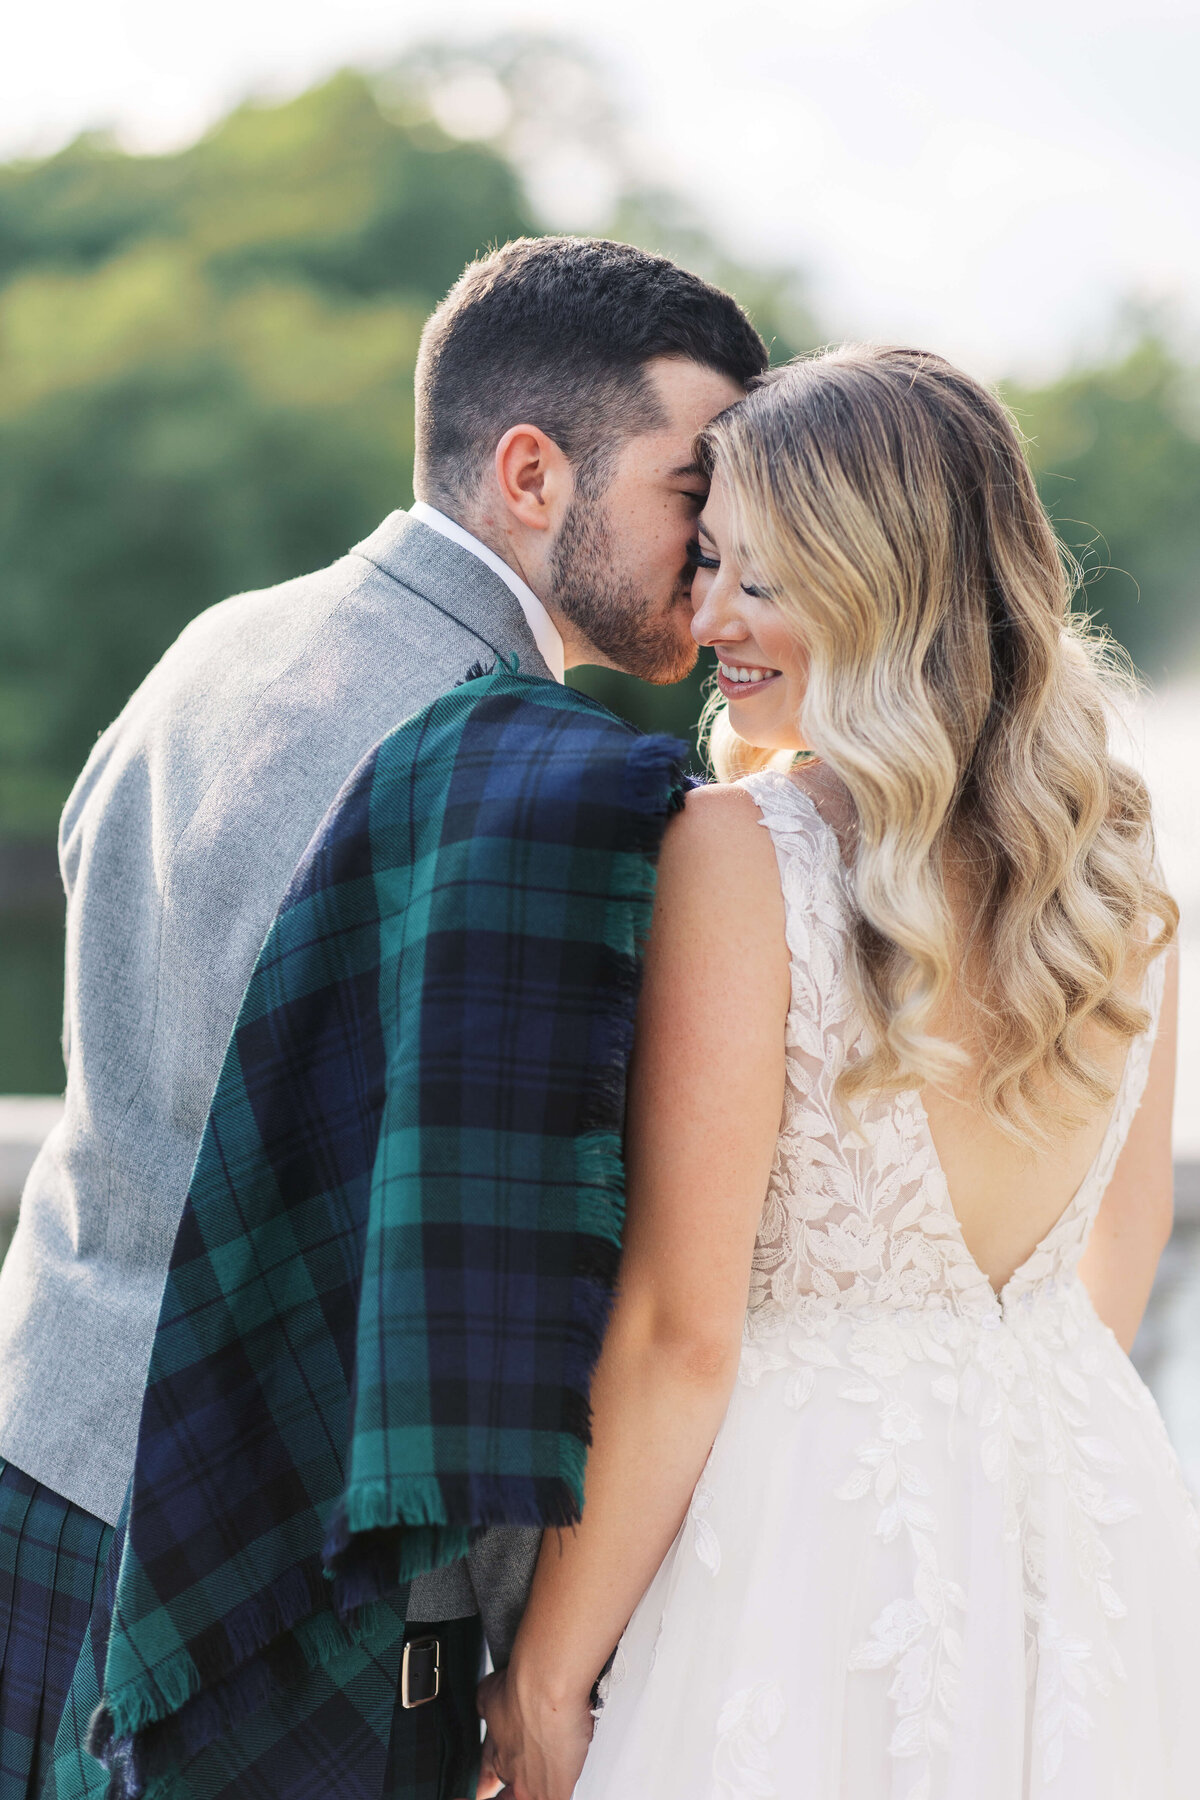 Bride in wedding gown with her groom who is wearing traditional Scottish wedding attire.